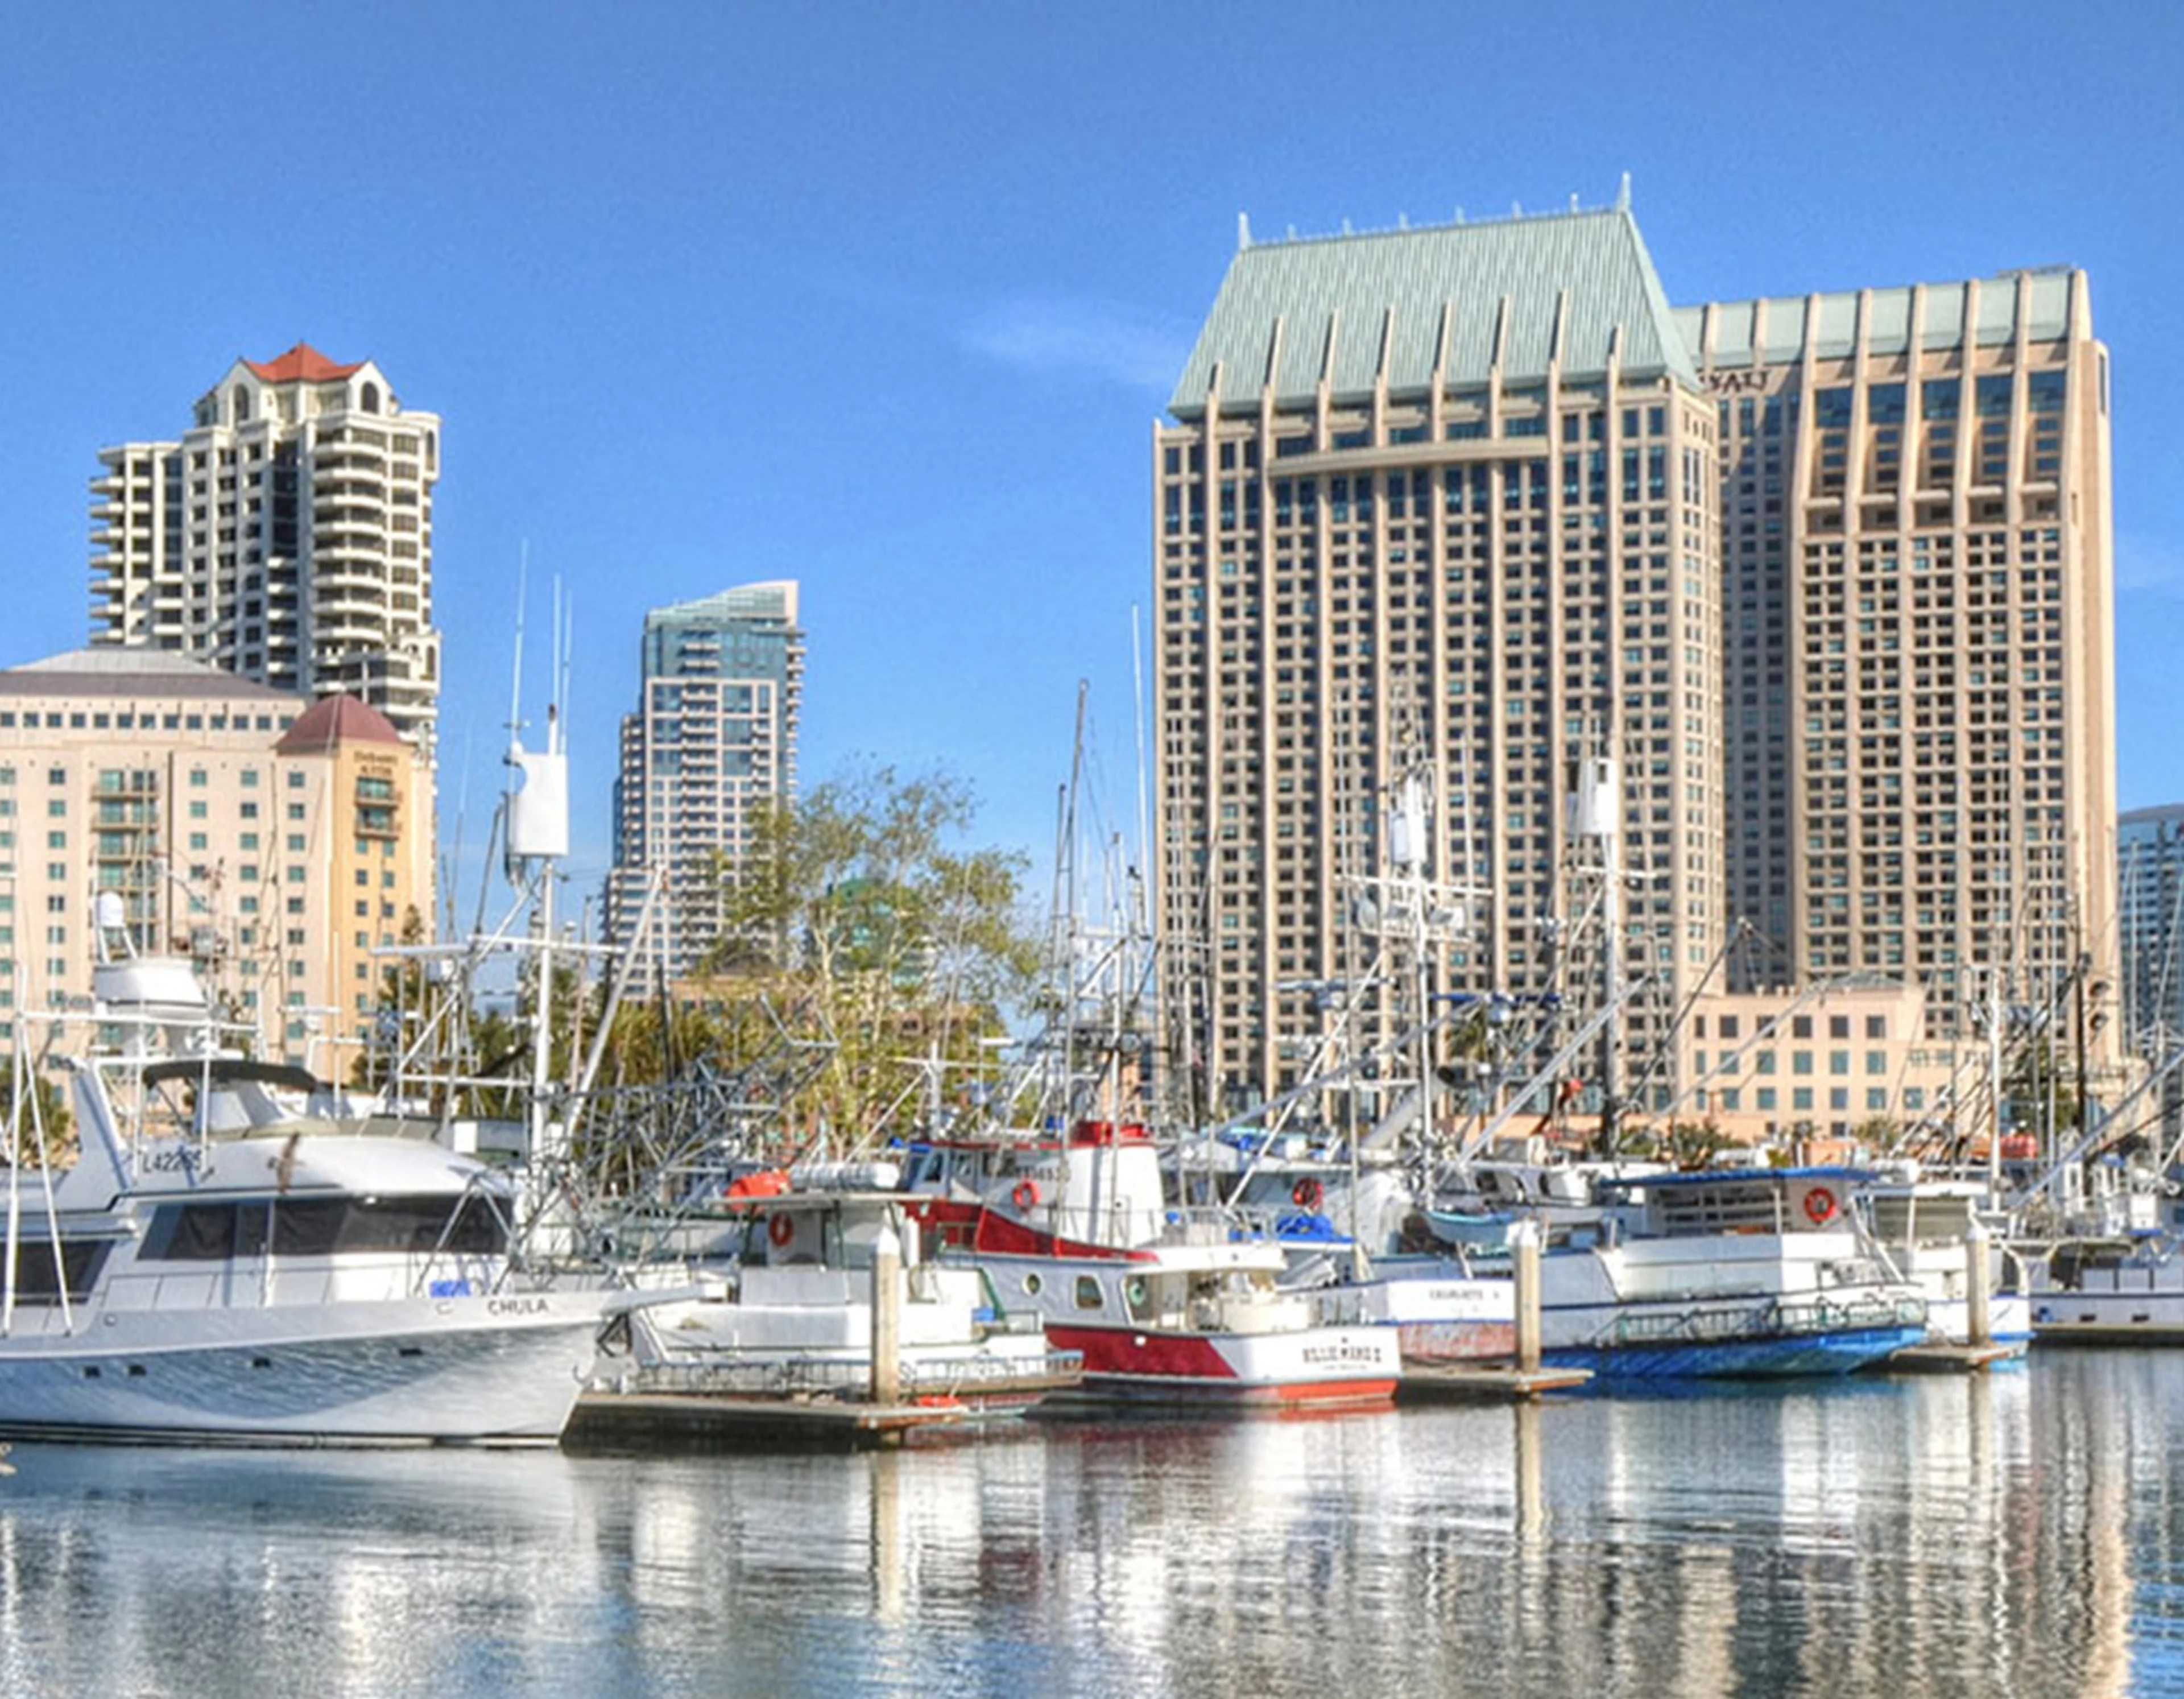 Boats in the San Diego Harbour, some buildings and skyscrapers in the background.